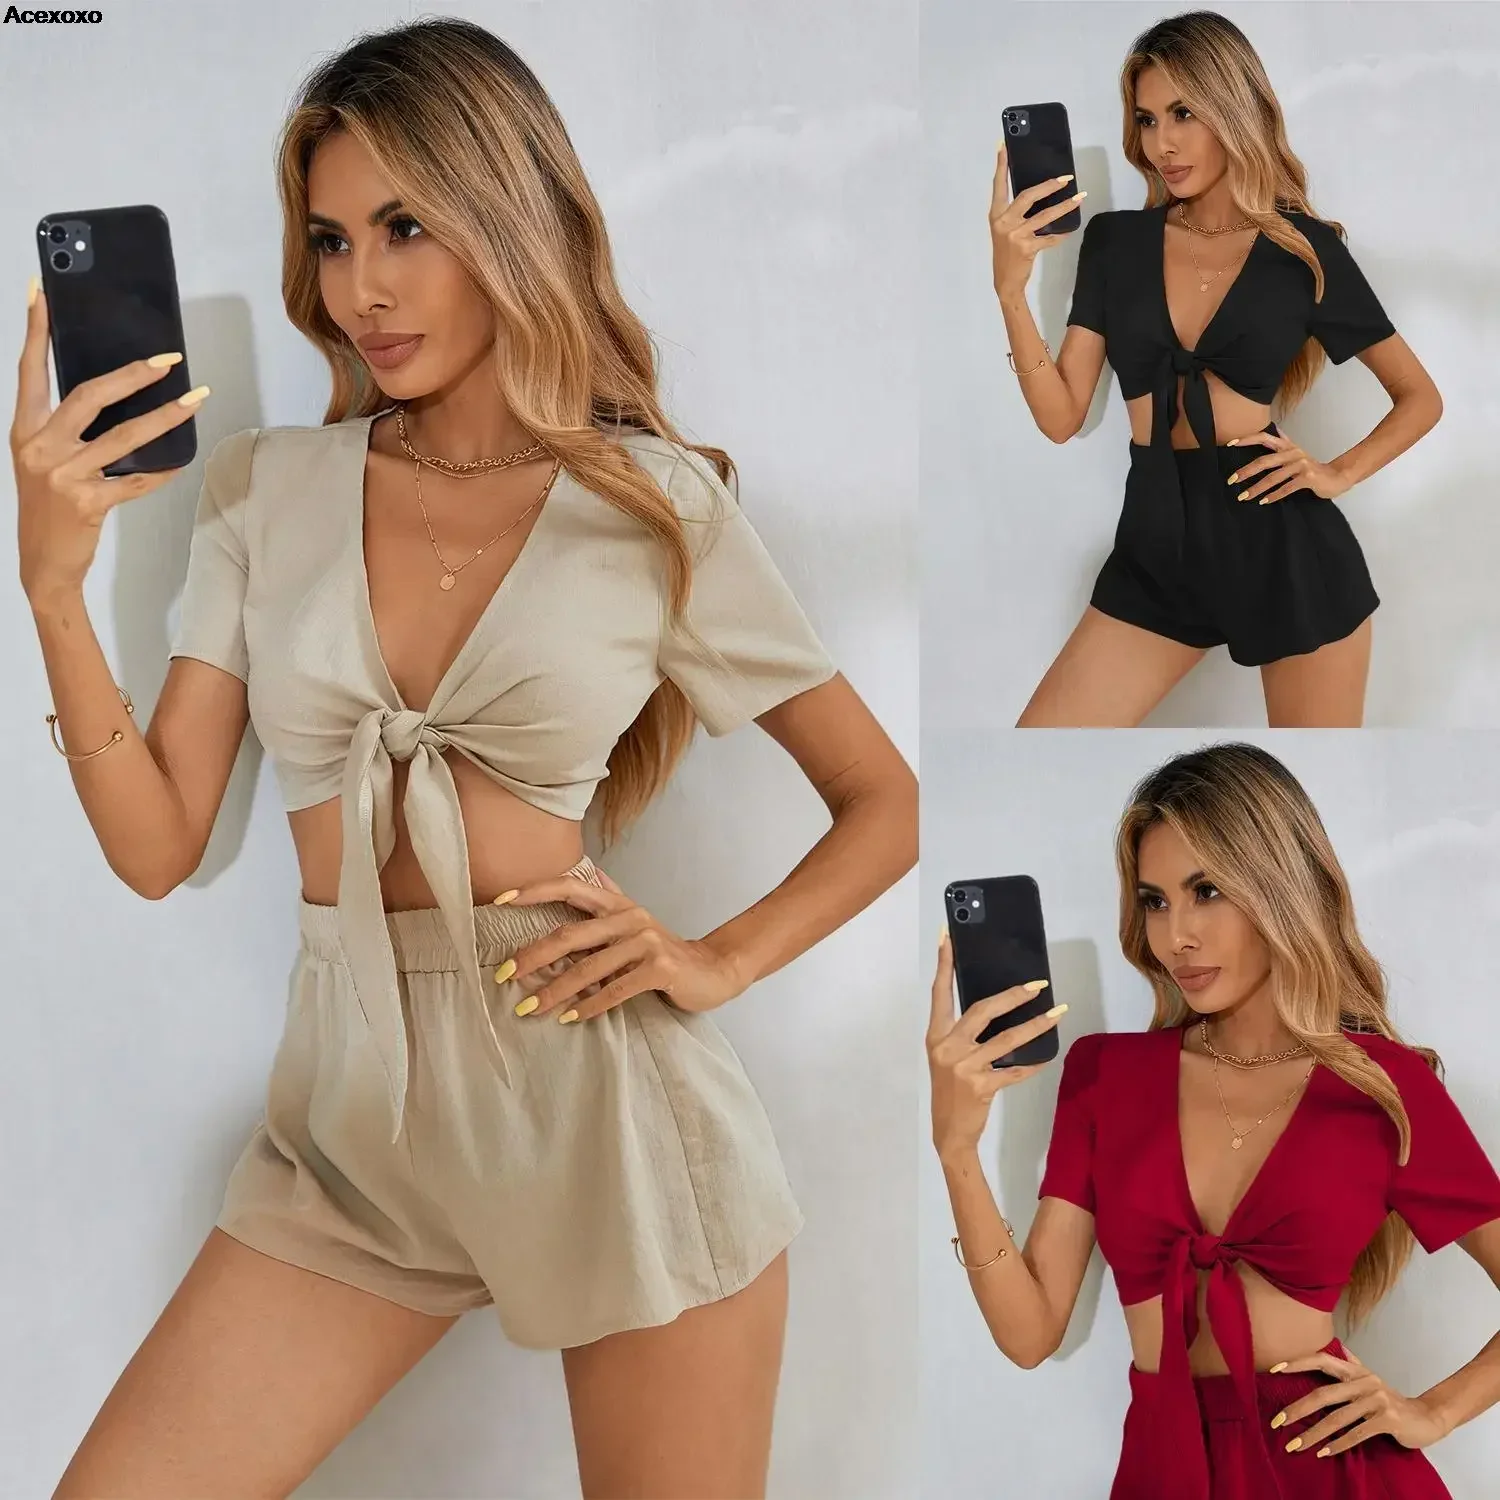 

Summer new women's fashion casual sexy slim temperament lacing low collar waist two-piece set